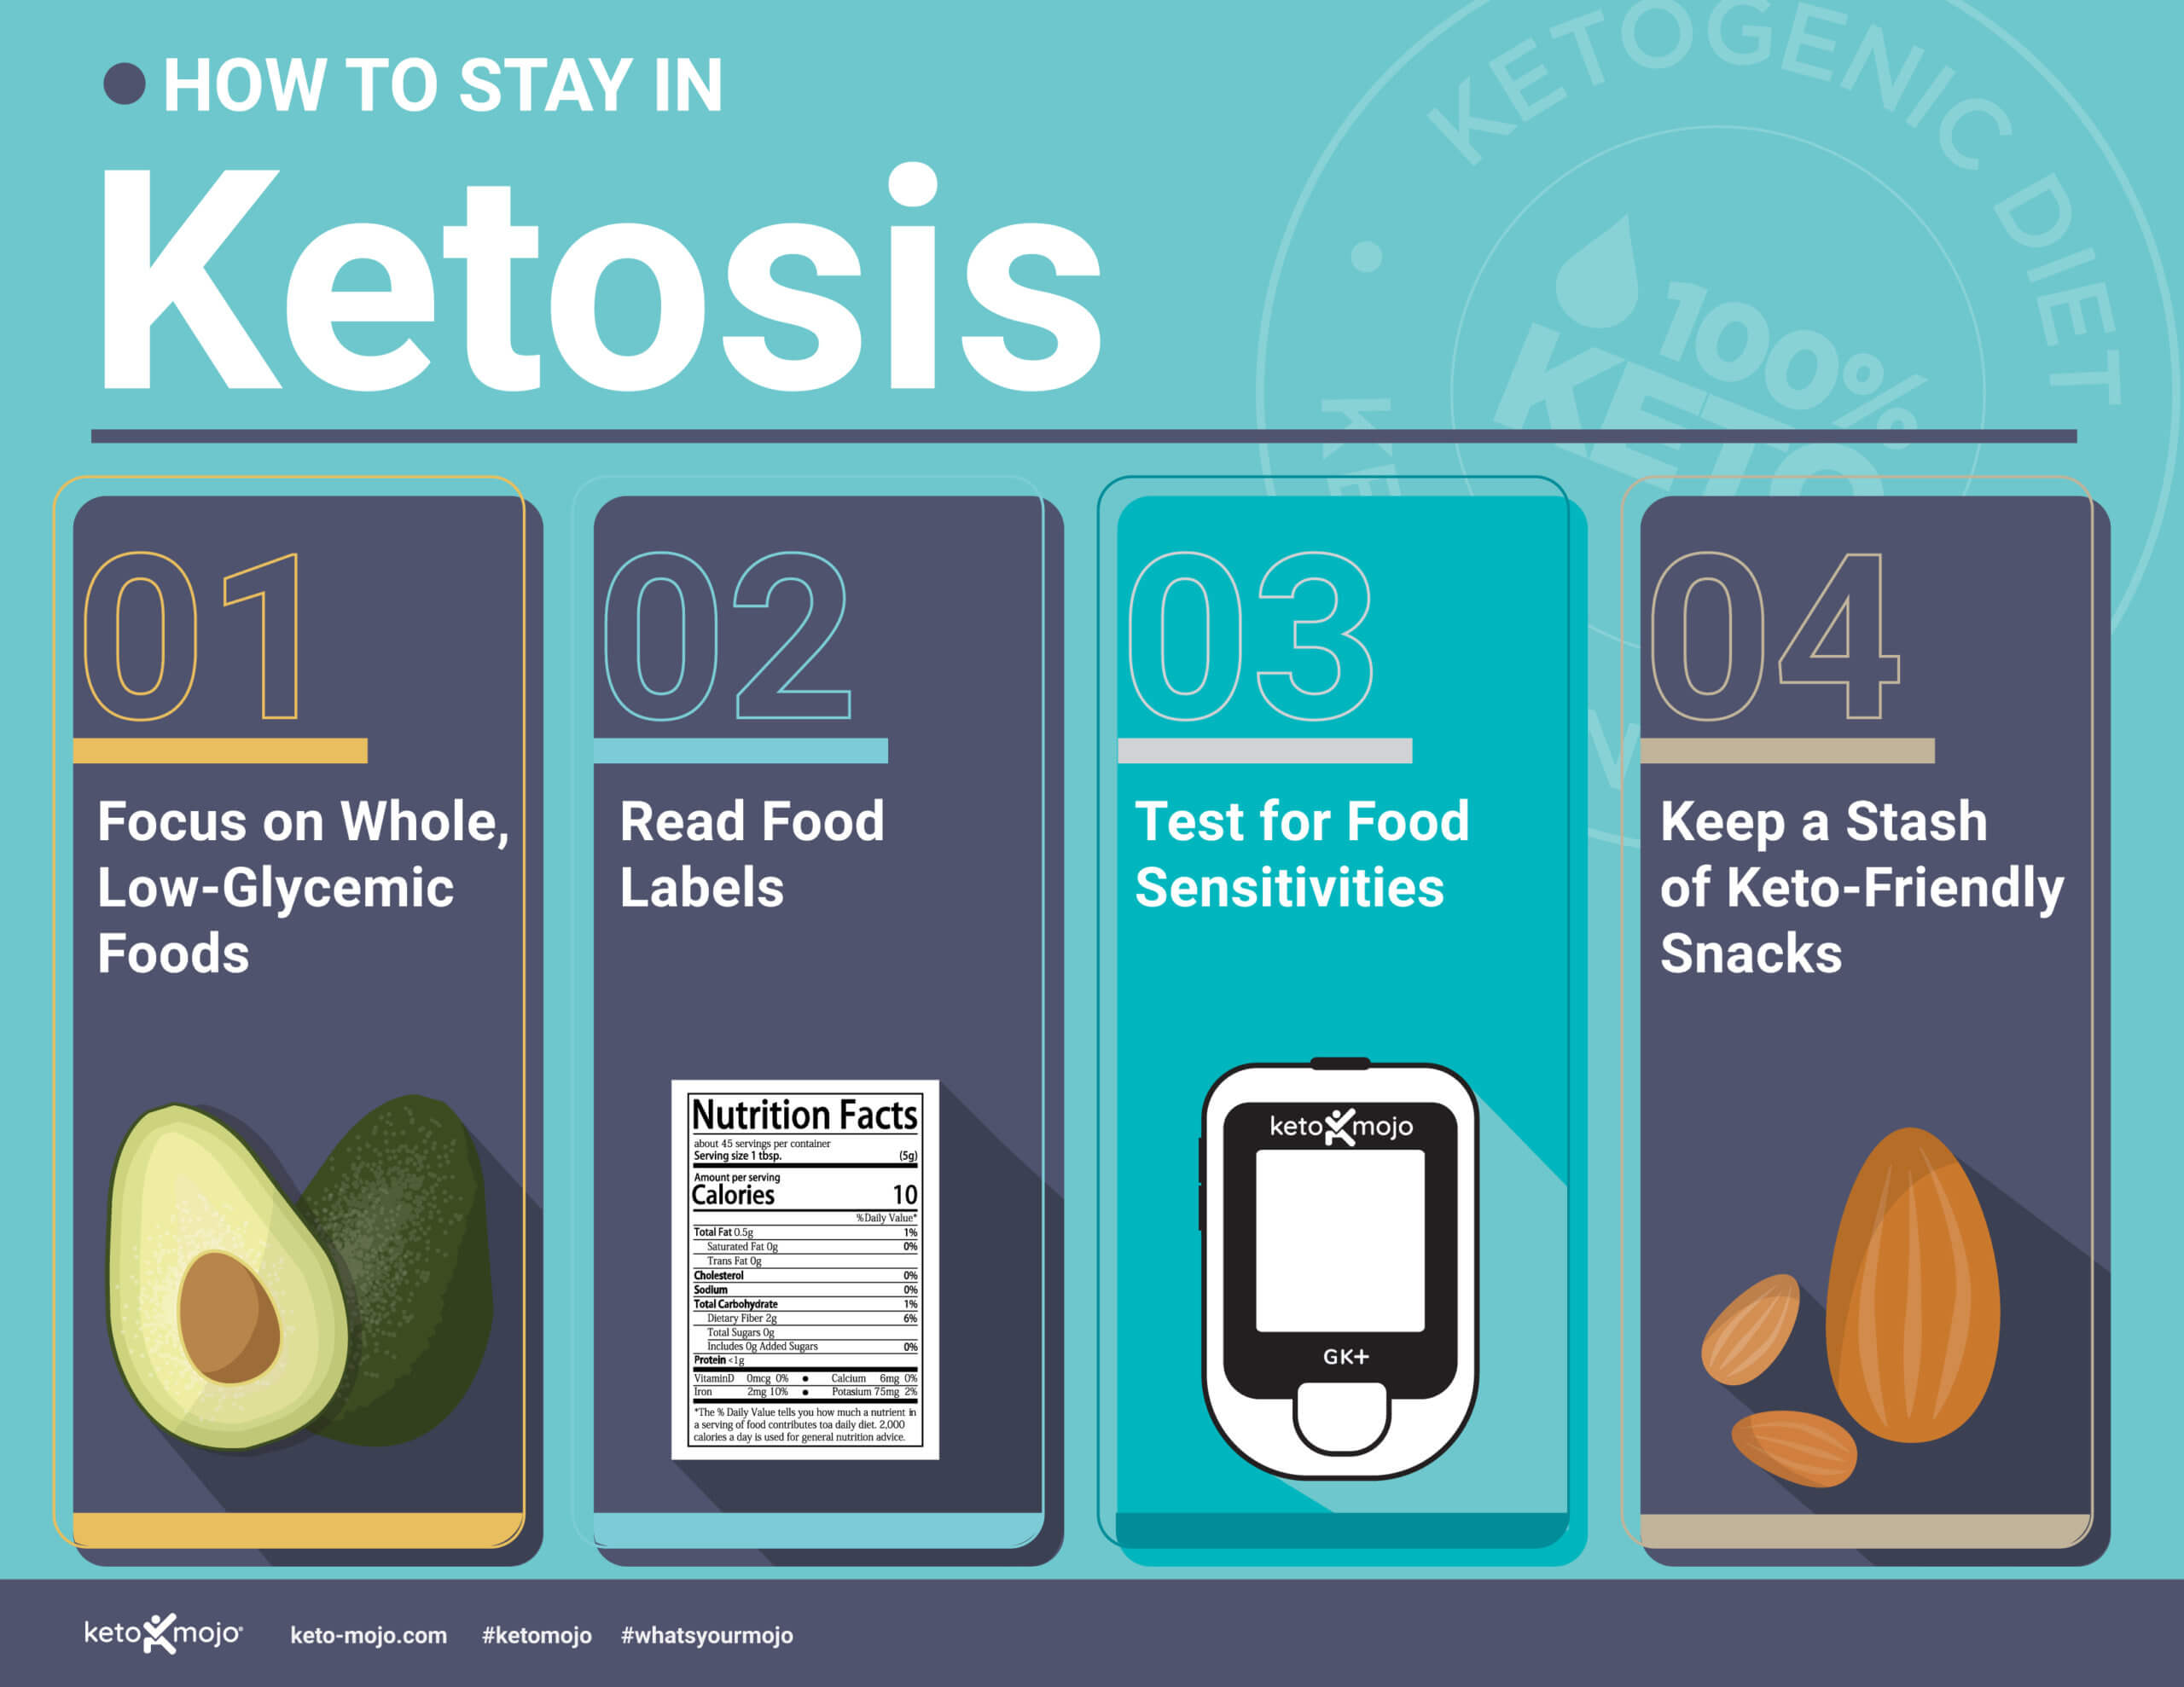 How to Stay in Ketosis